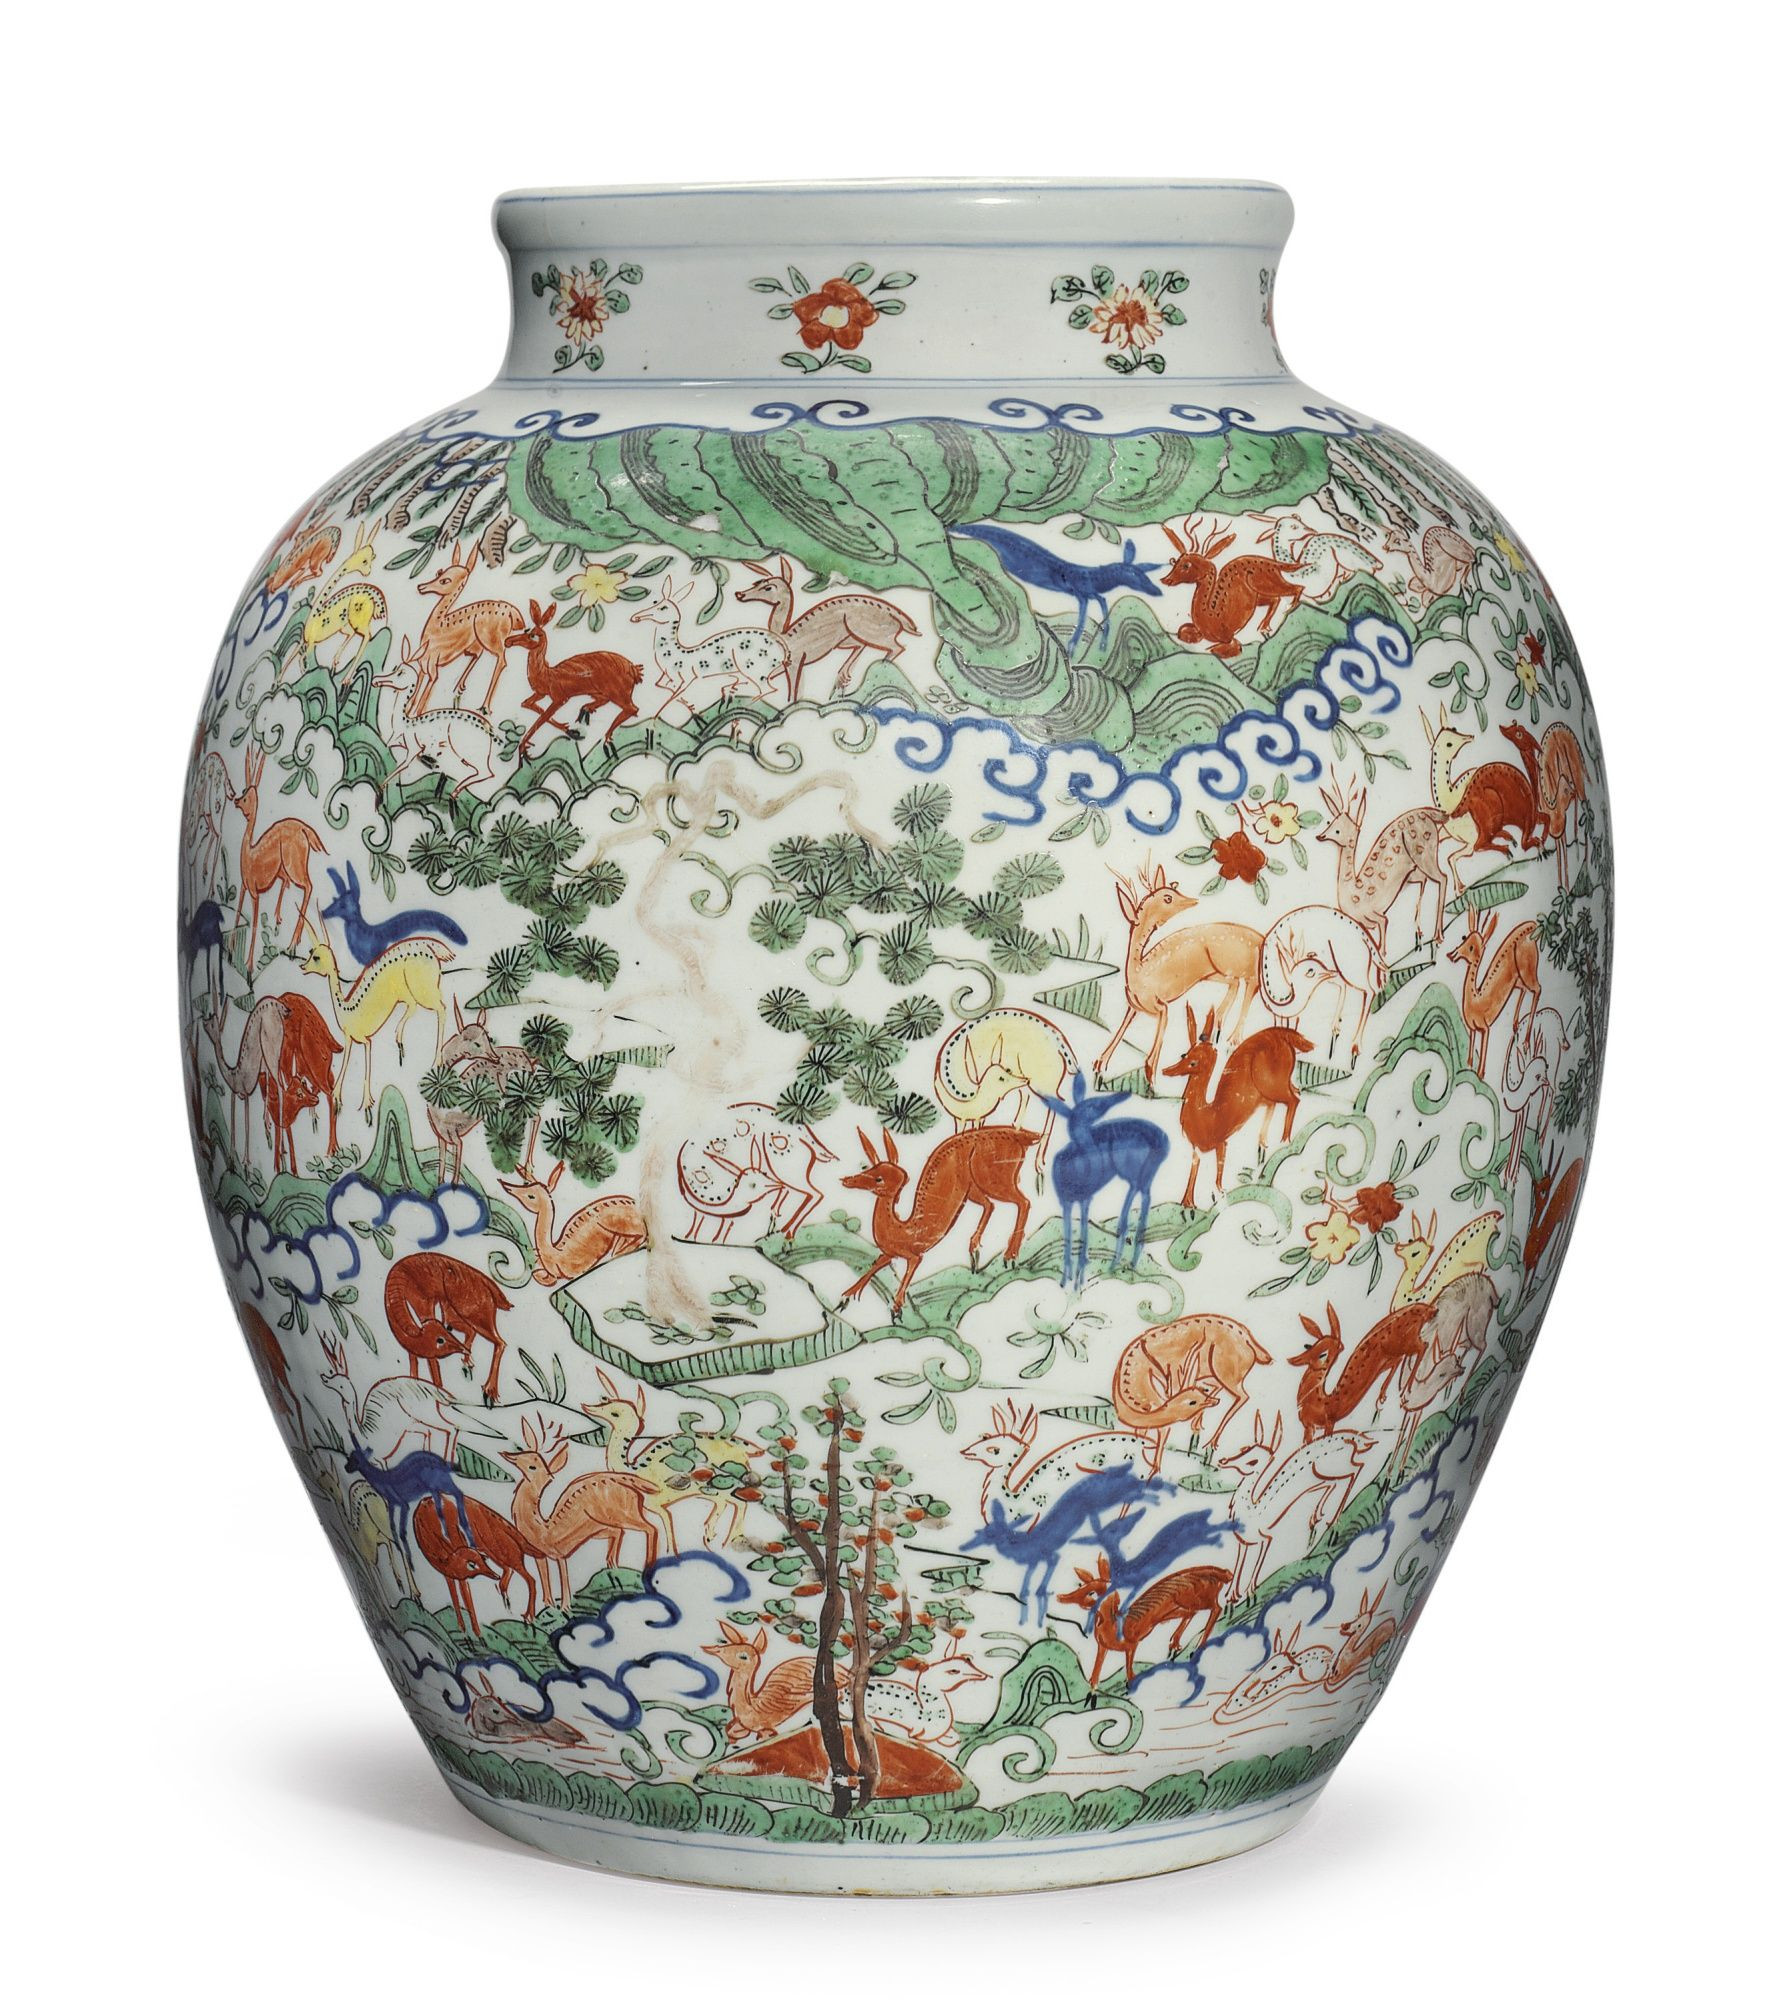 18 Spectacular Large oriental Vases 2024 free download large oriental vases of a large and important wucai hundred deer vase wanli mark and for a large and important wucai hundred deer vase wanli mark and period 1573 1619